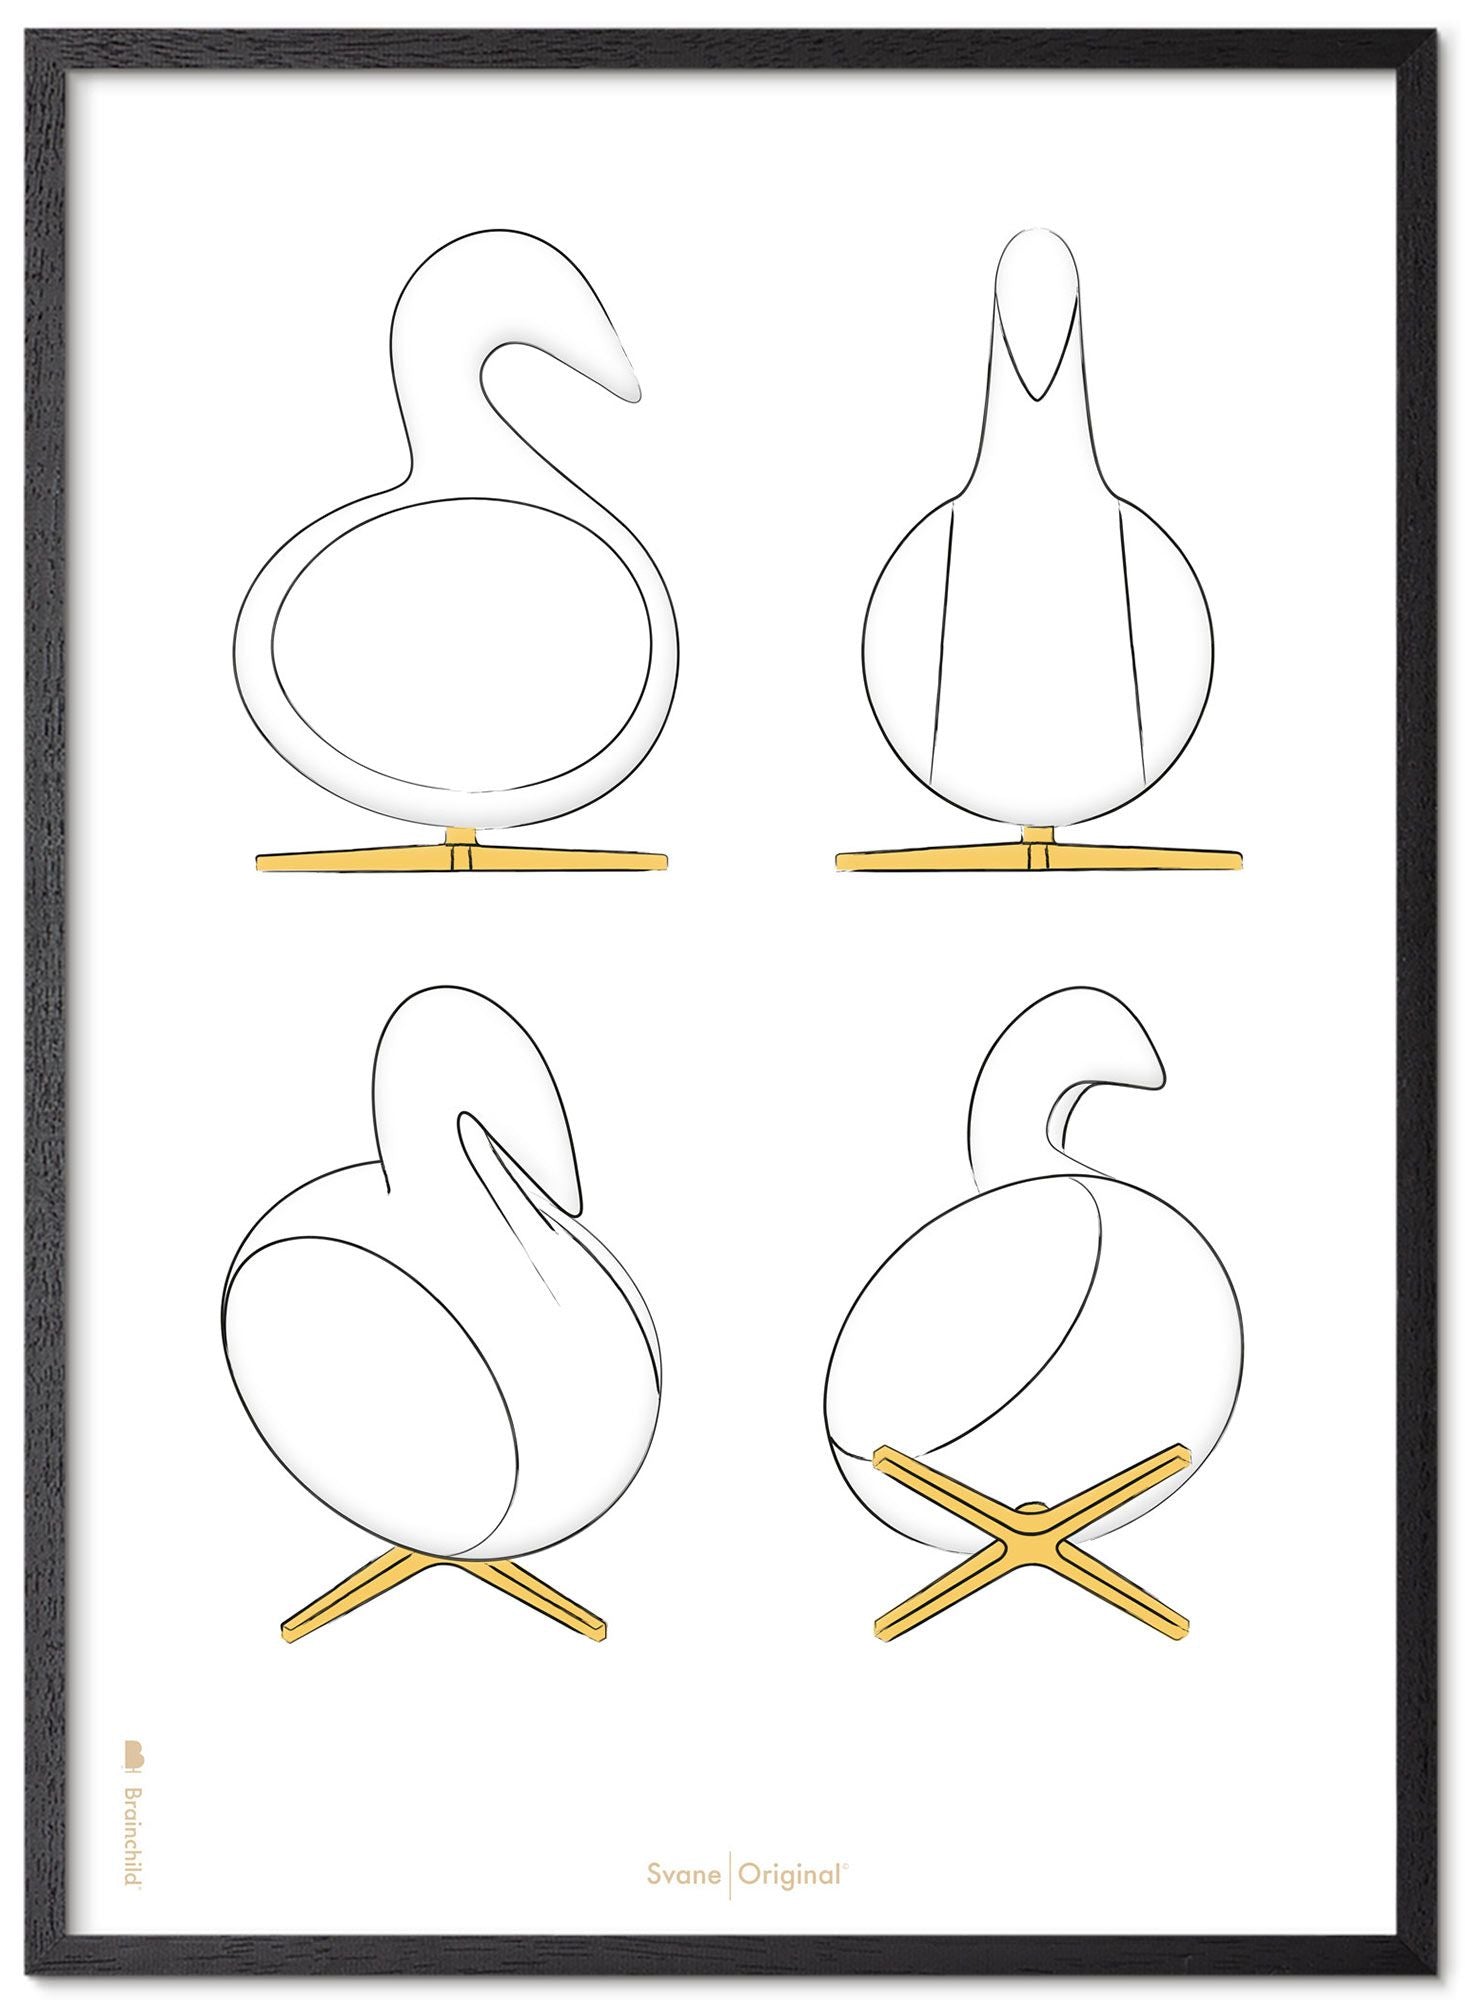 Brainchild Swan Design Sketches Poster Frame Made Of Black Lacquered Wood 70x100 Cm, White Background